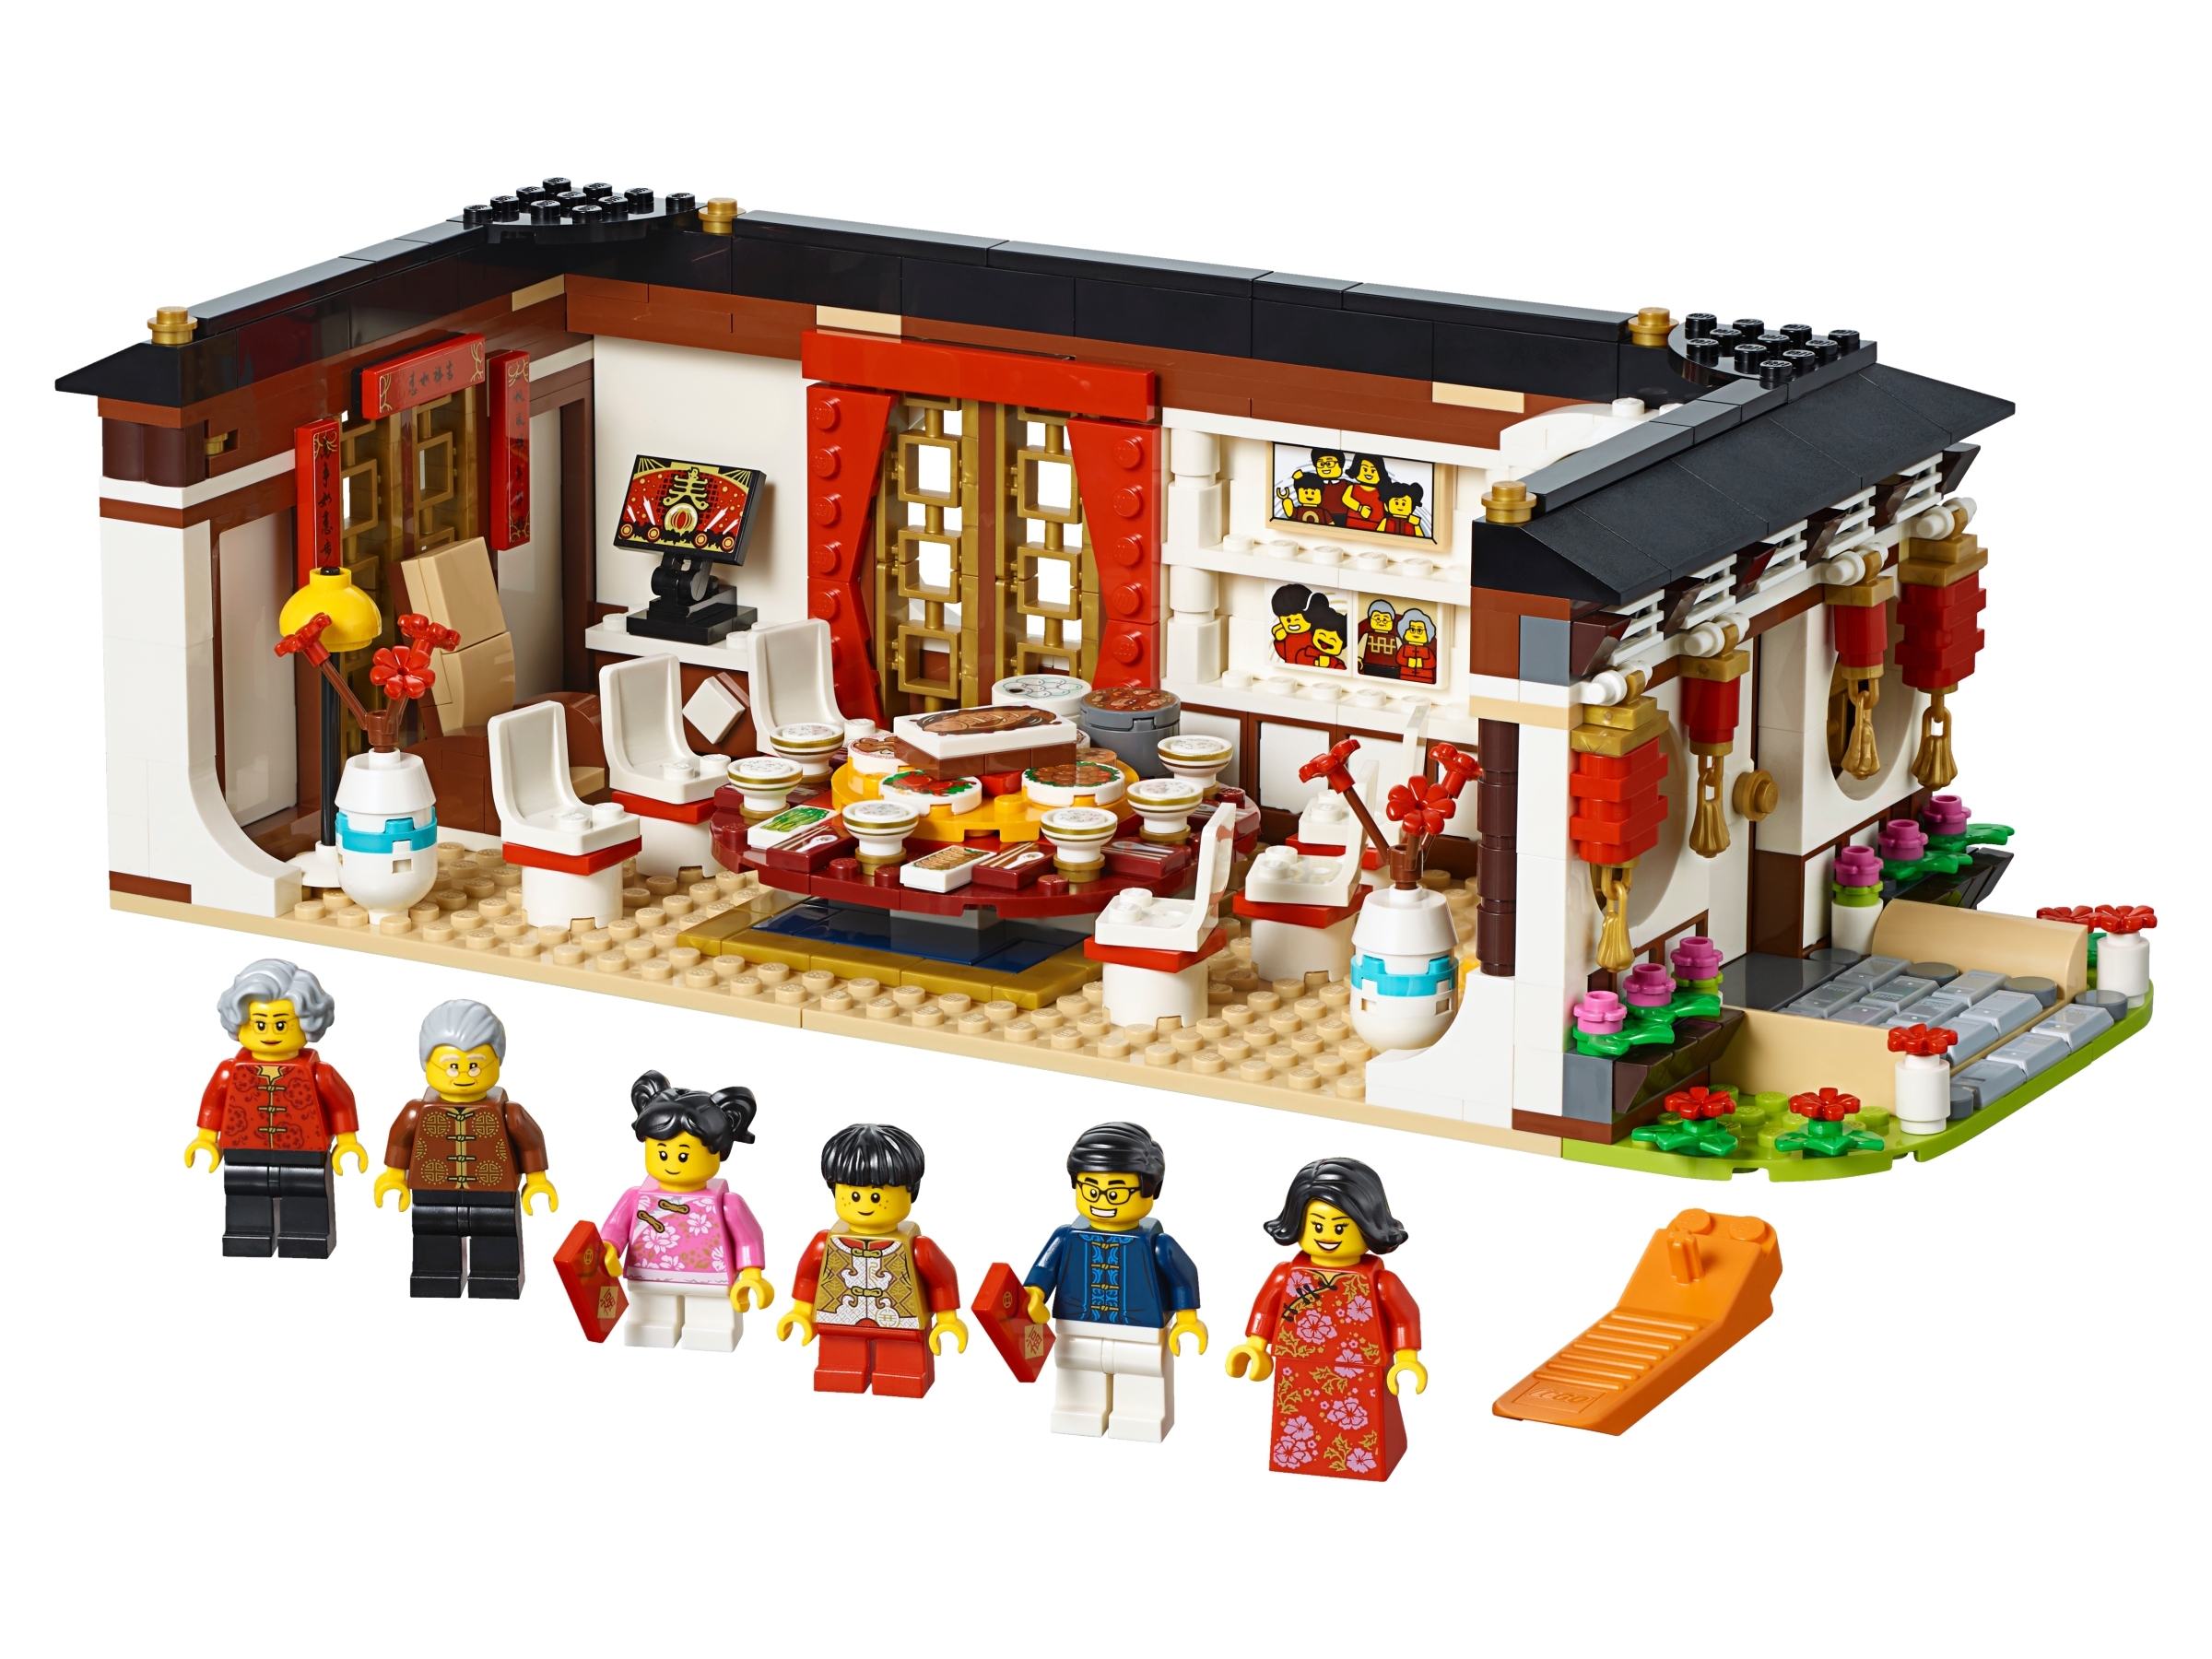 Chinese New Year's Eve Dinner 80101 | UNKNOWN Buy online at the Official LEGO® Shop AU